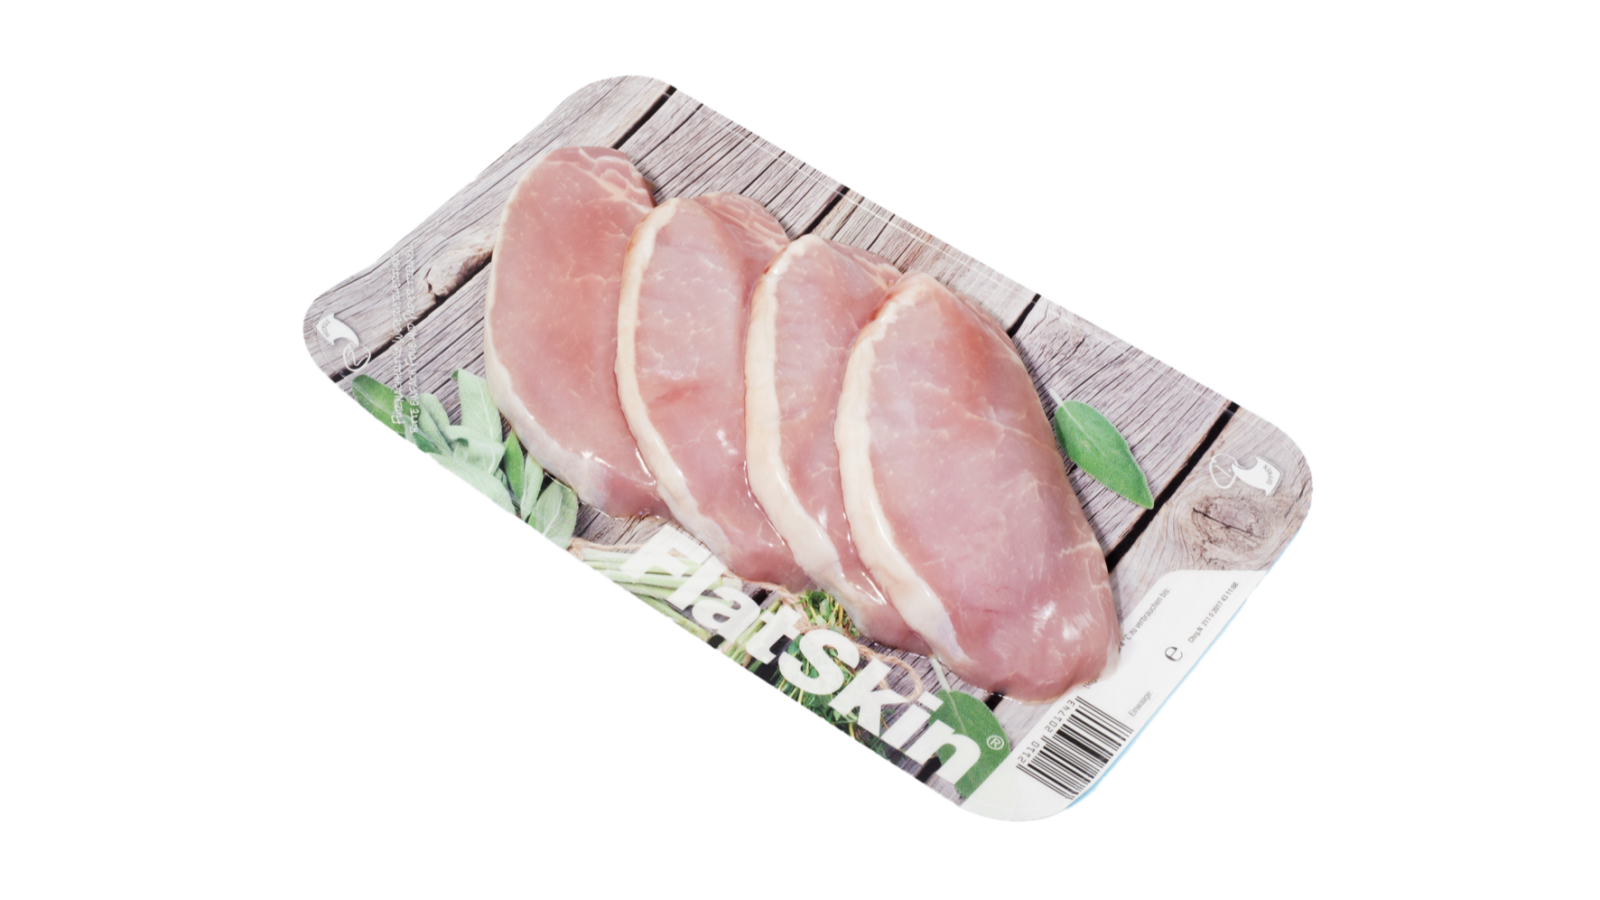 Skinpack from Nemco is the perfect solution for highlighting the product in the refrigerated display. We have a wide range of meat packaging for products such as meat, fish, chicken, vegetables, and ready meals, several of which are reusable or plastic-reduced.